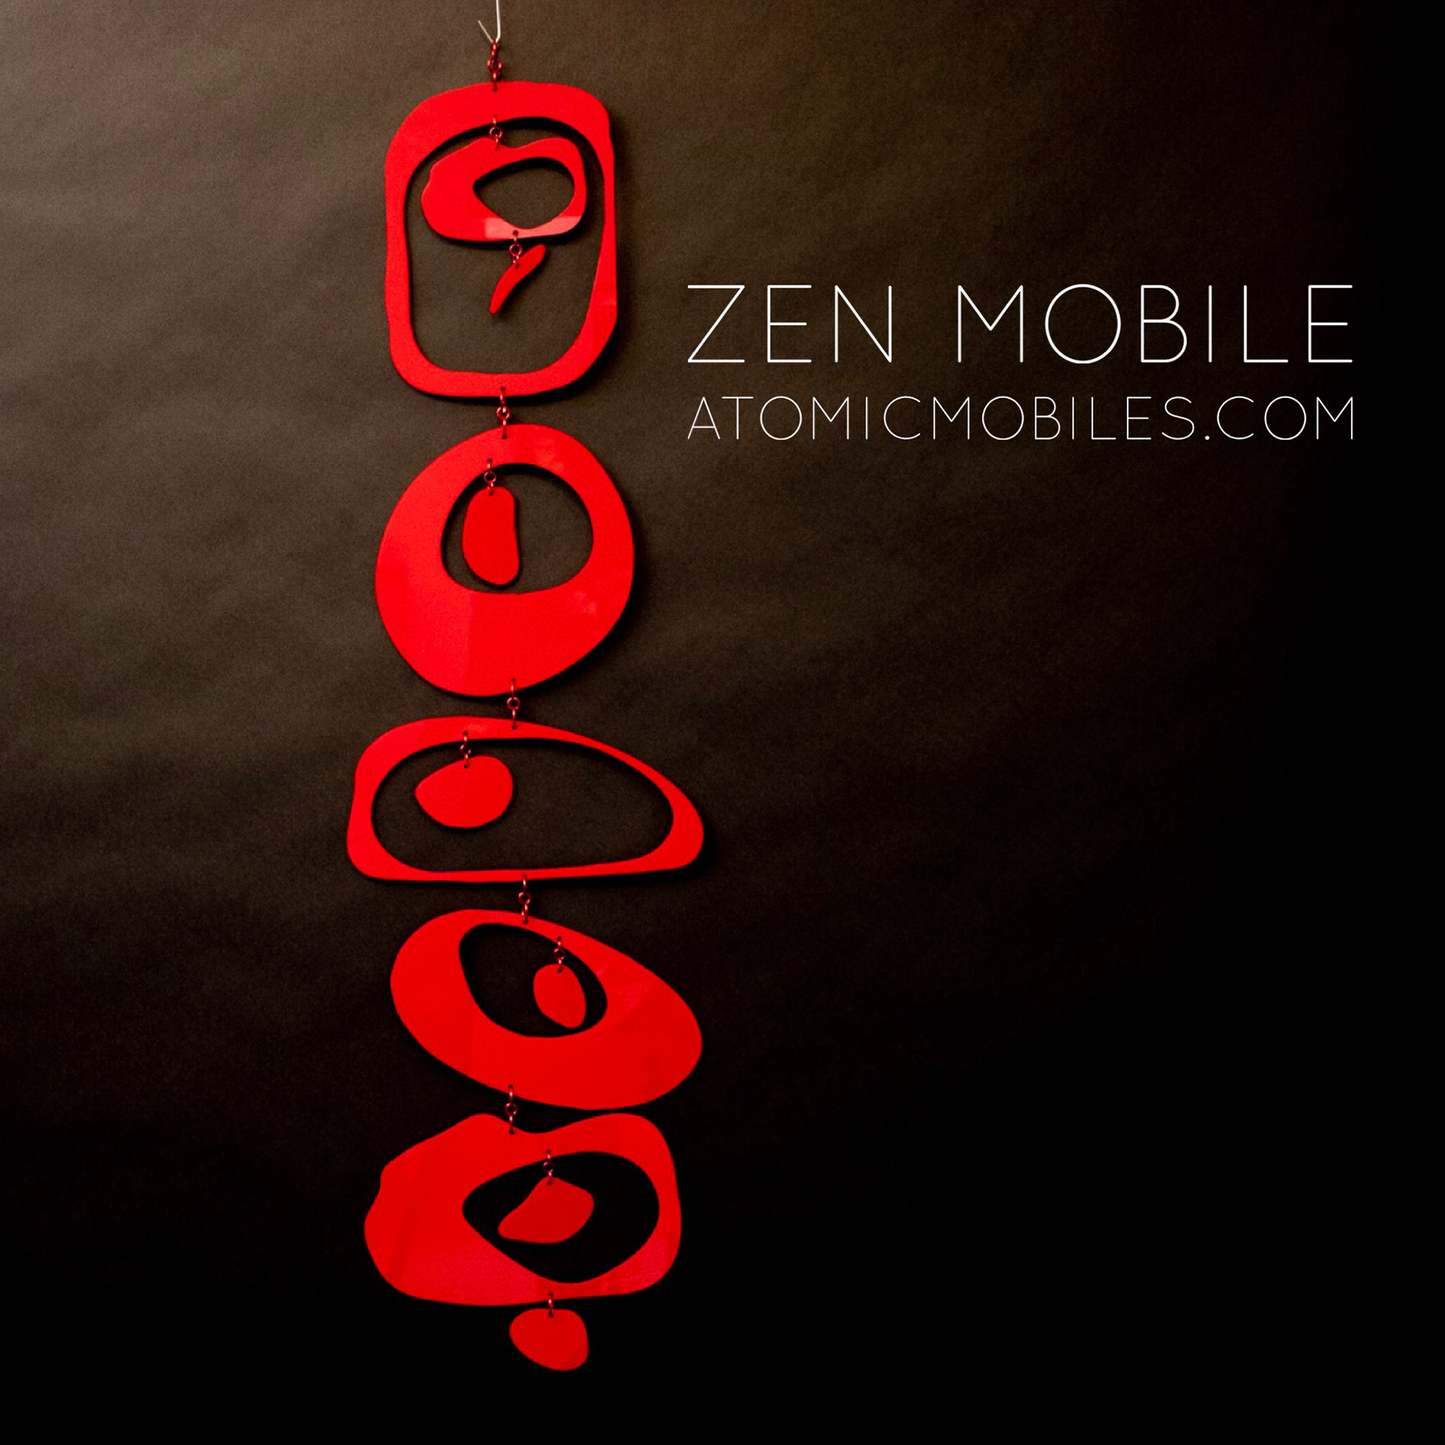 Zen Mobile in Red by AtomicMobiles.com - calm kinetic sculpture inspired by rock balancing